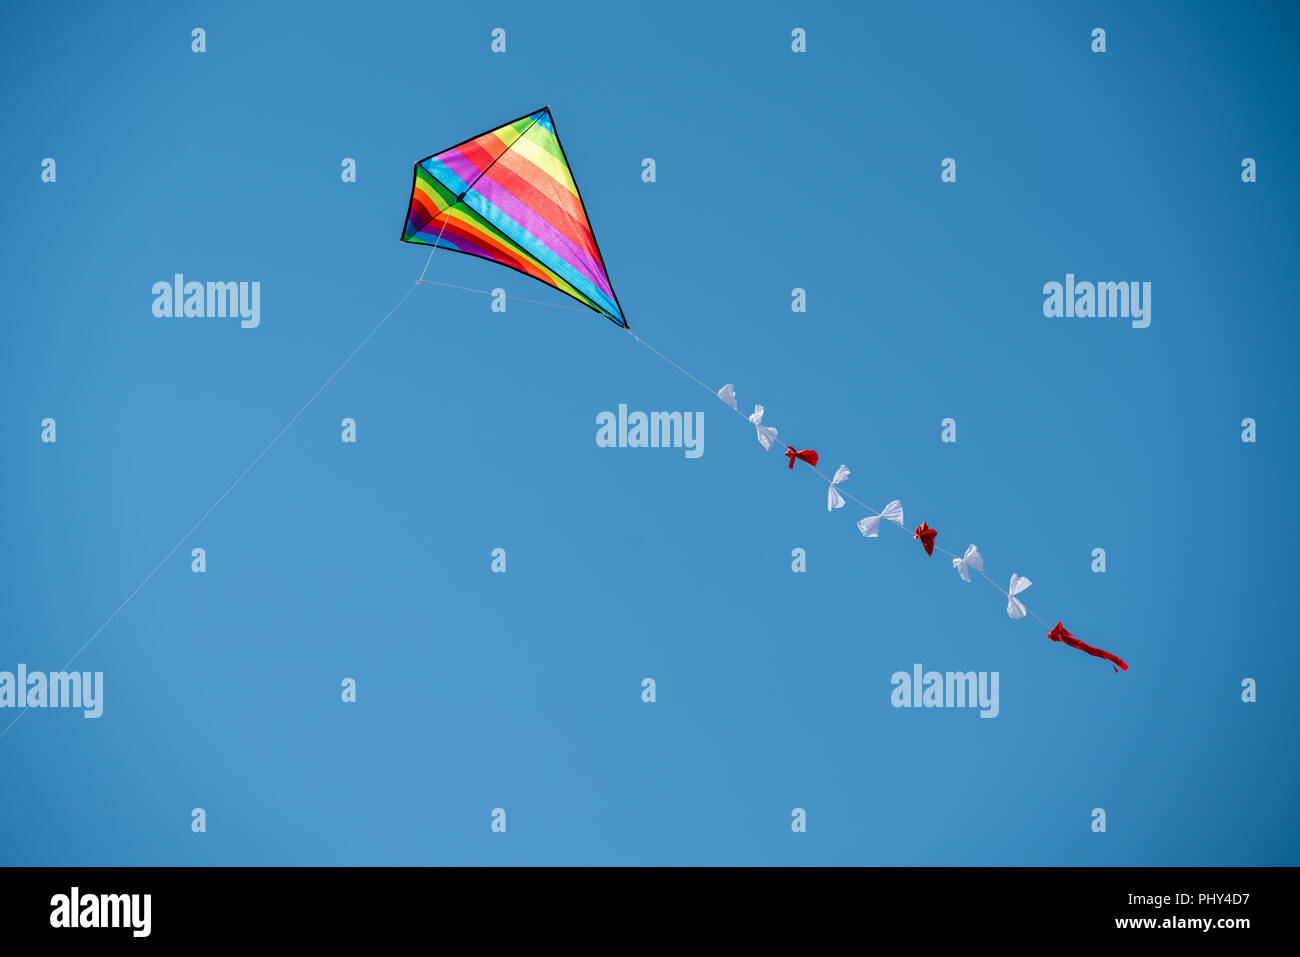 Colorful kite flying against a blue sky. Stock Photo